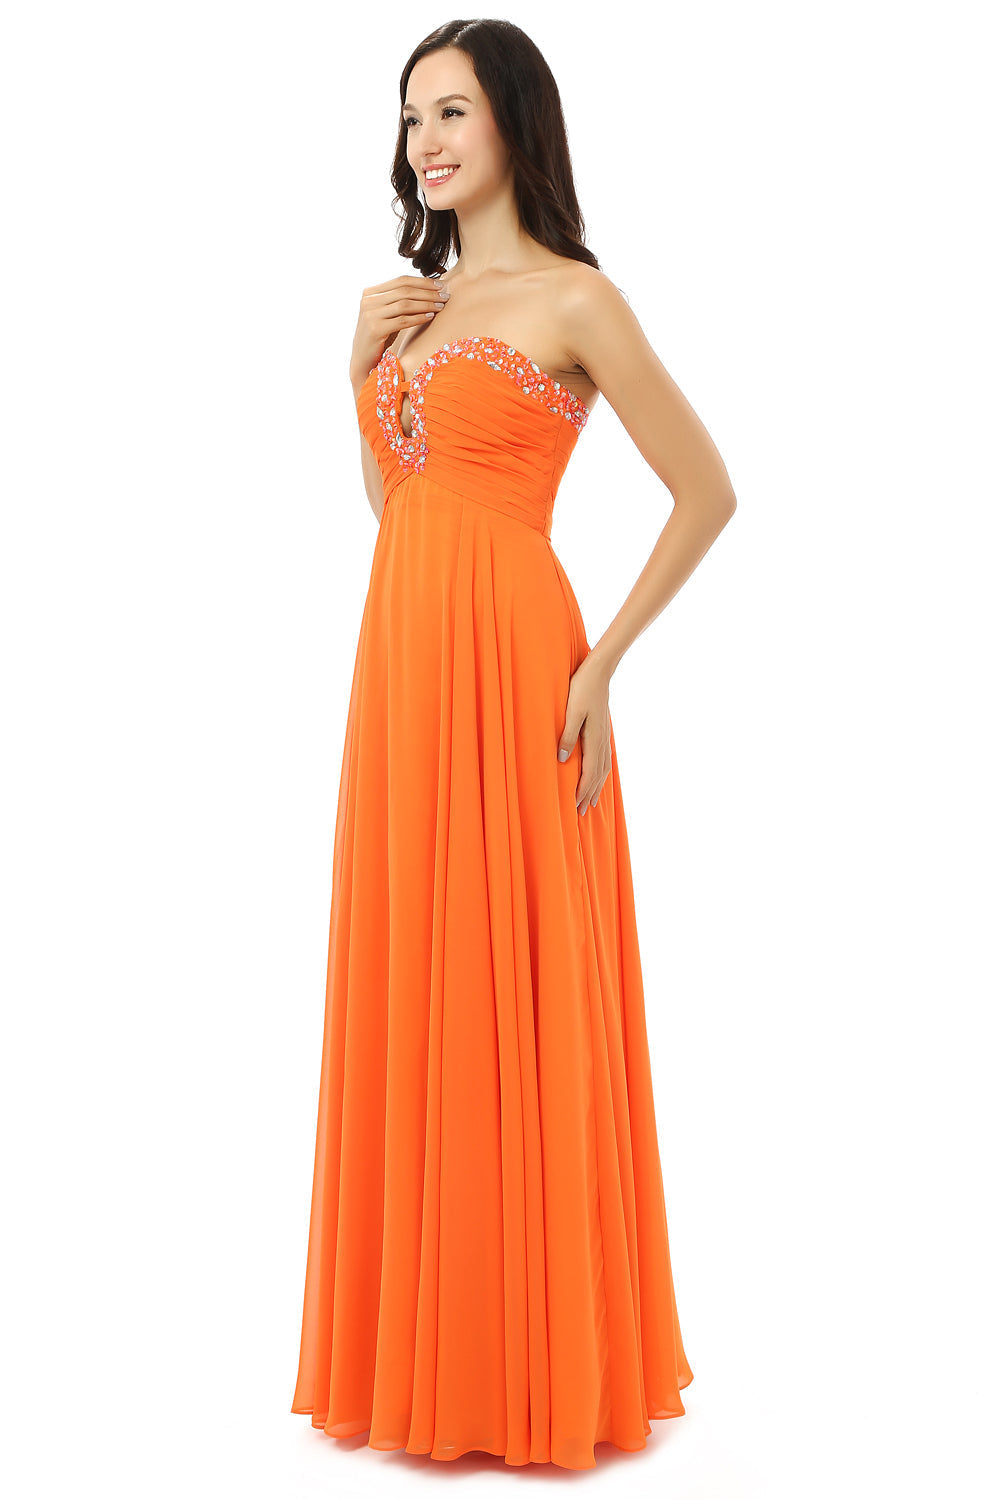 Homecoming Dresses Fashion Outfits, Orange Chiffon Cut Out Sweetheart With Pleats Bridesmaid Dresses